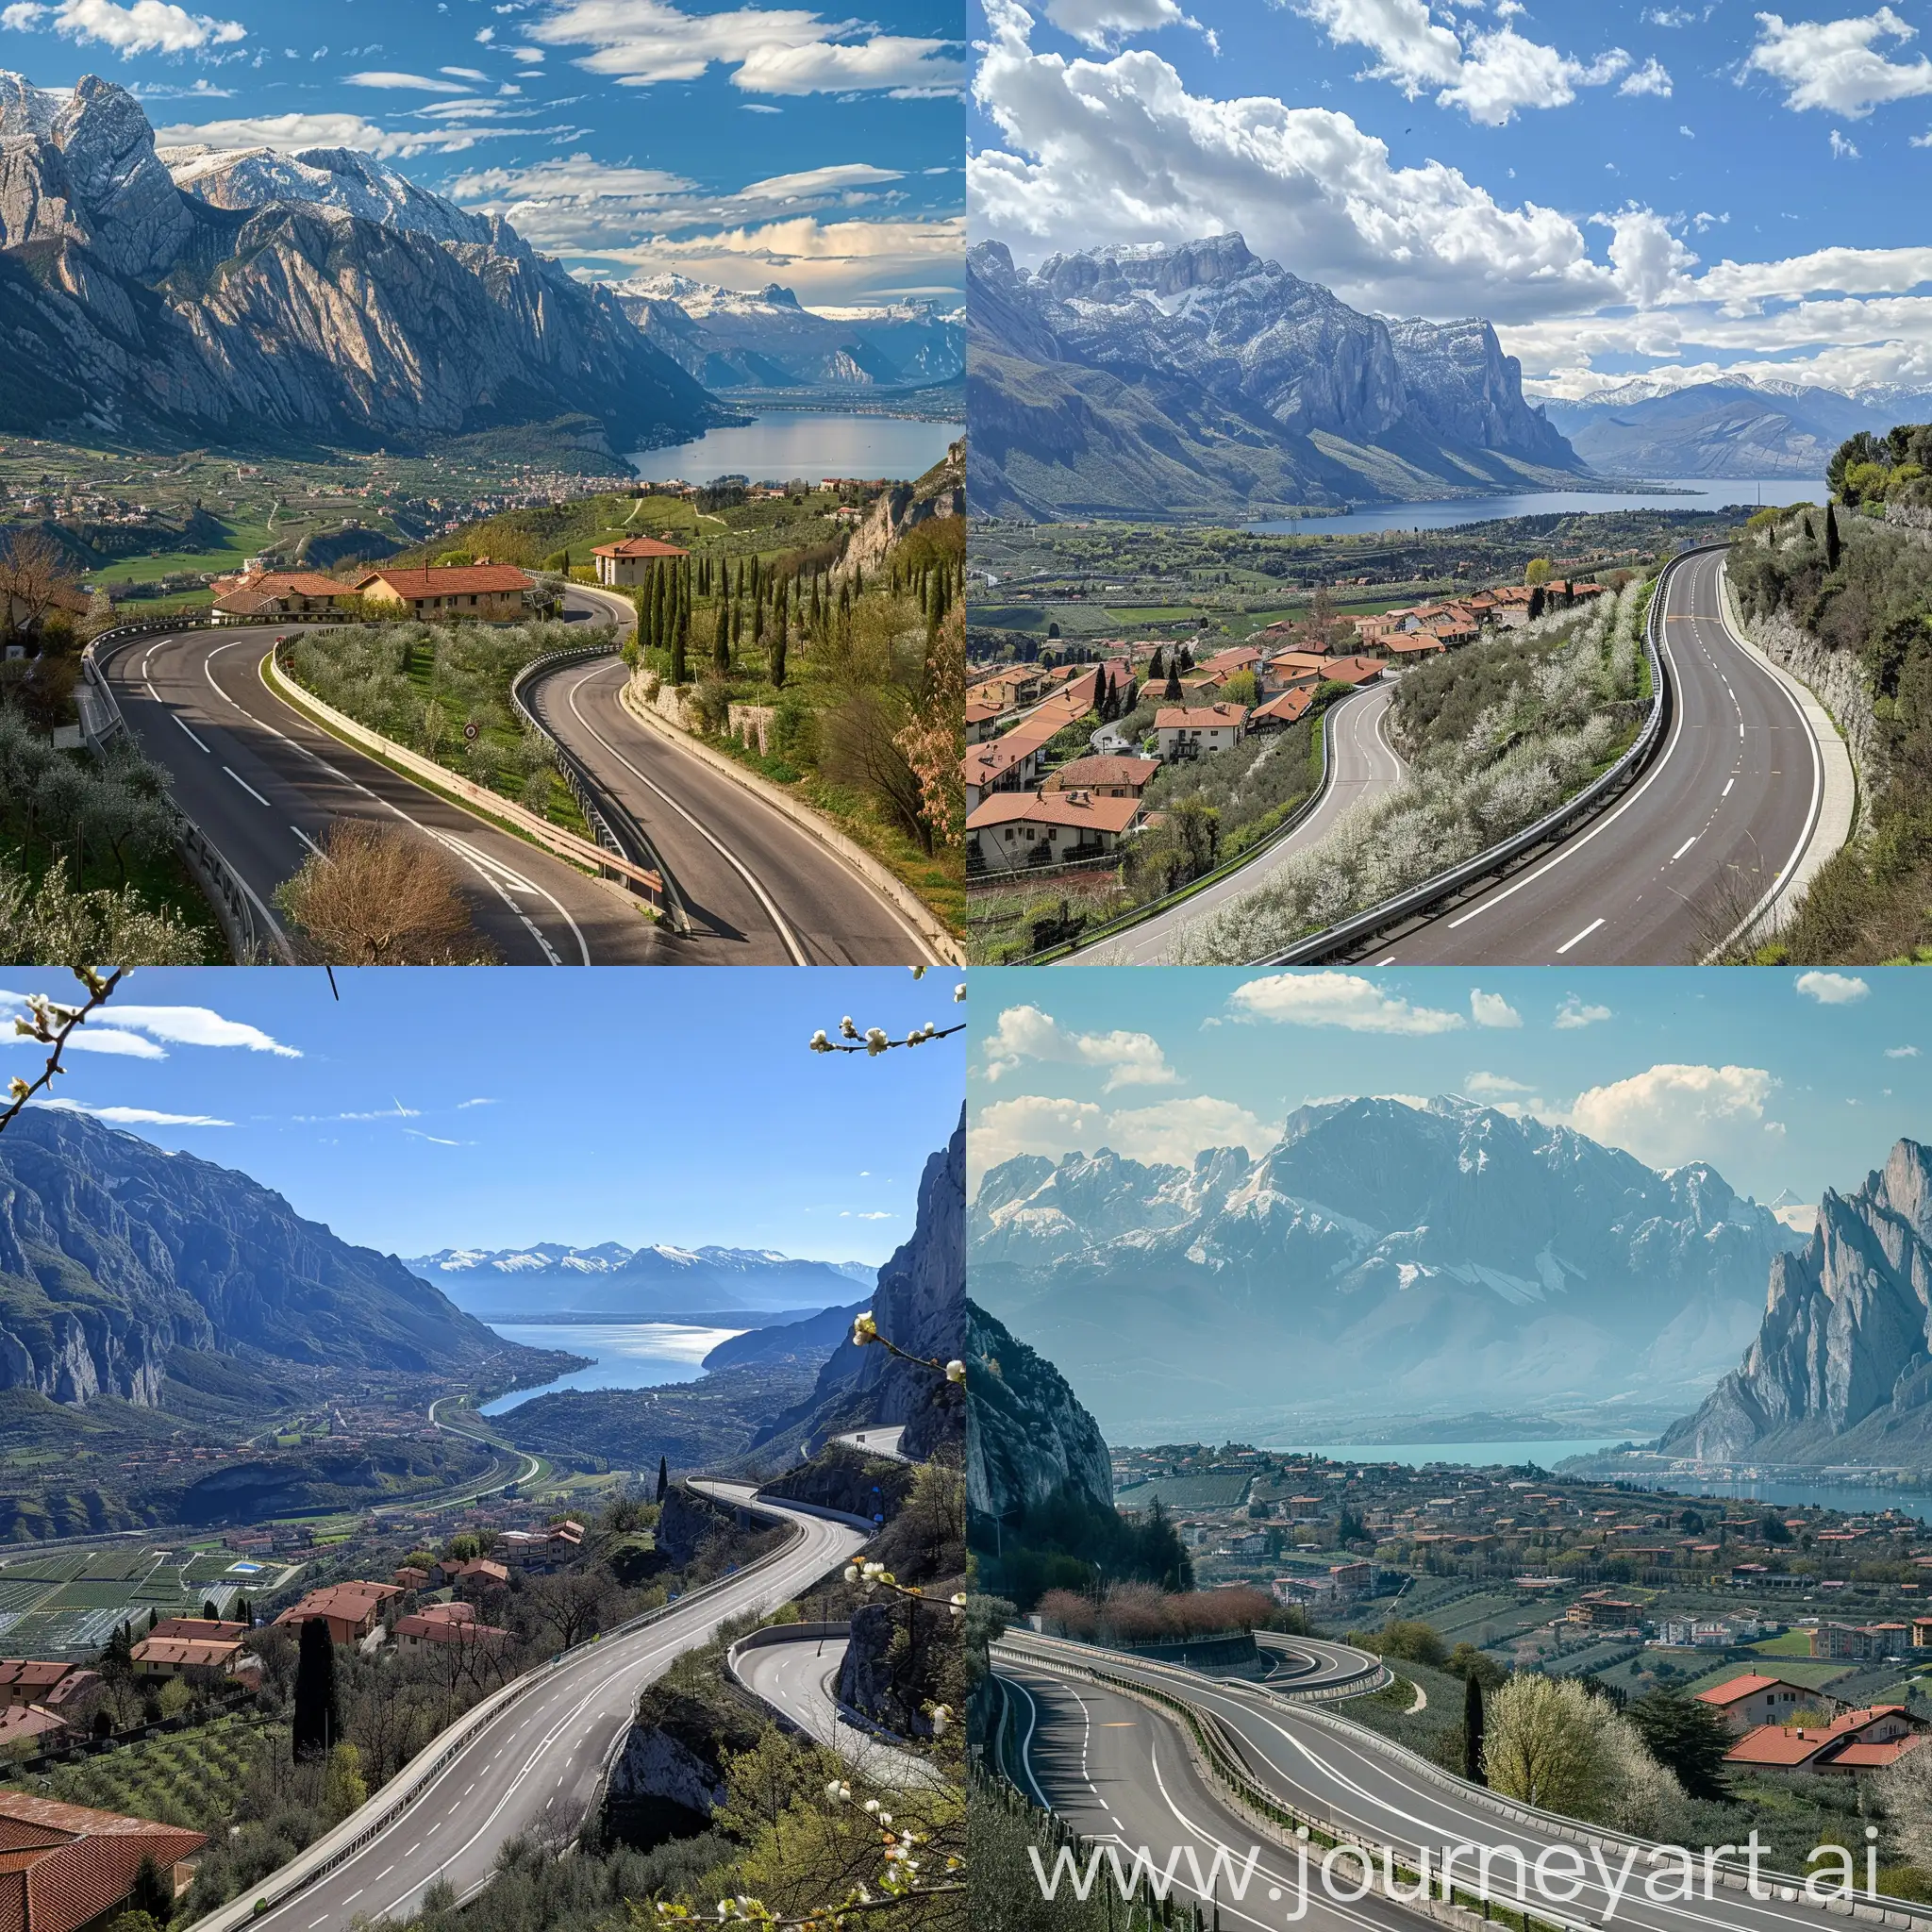 Scenic-Drive-Dolomite-Alps-Overlooking-Sarca-Valley-and-Lake-Garda